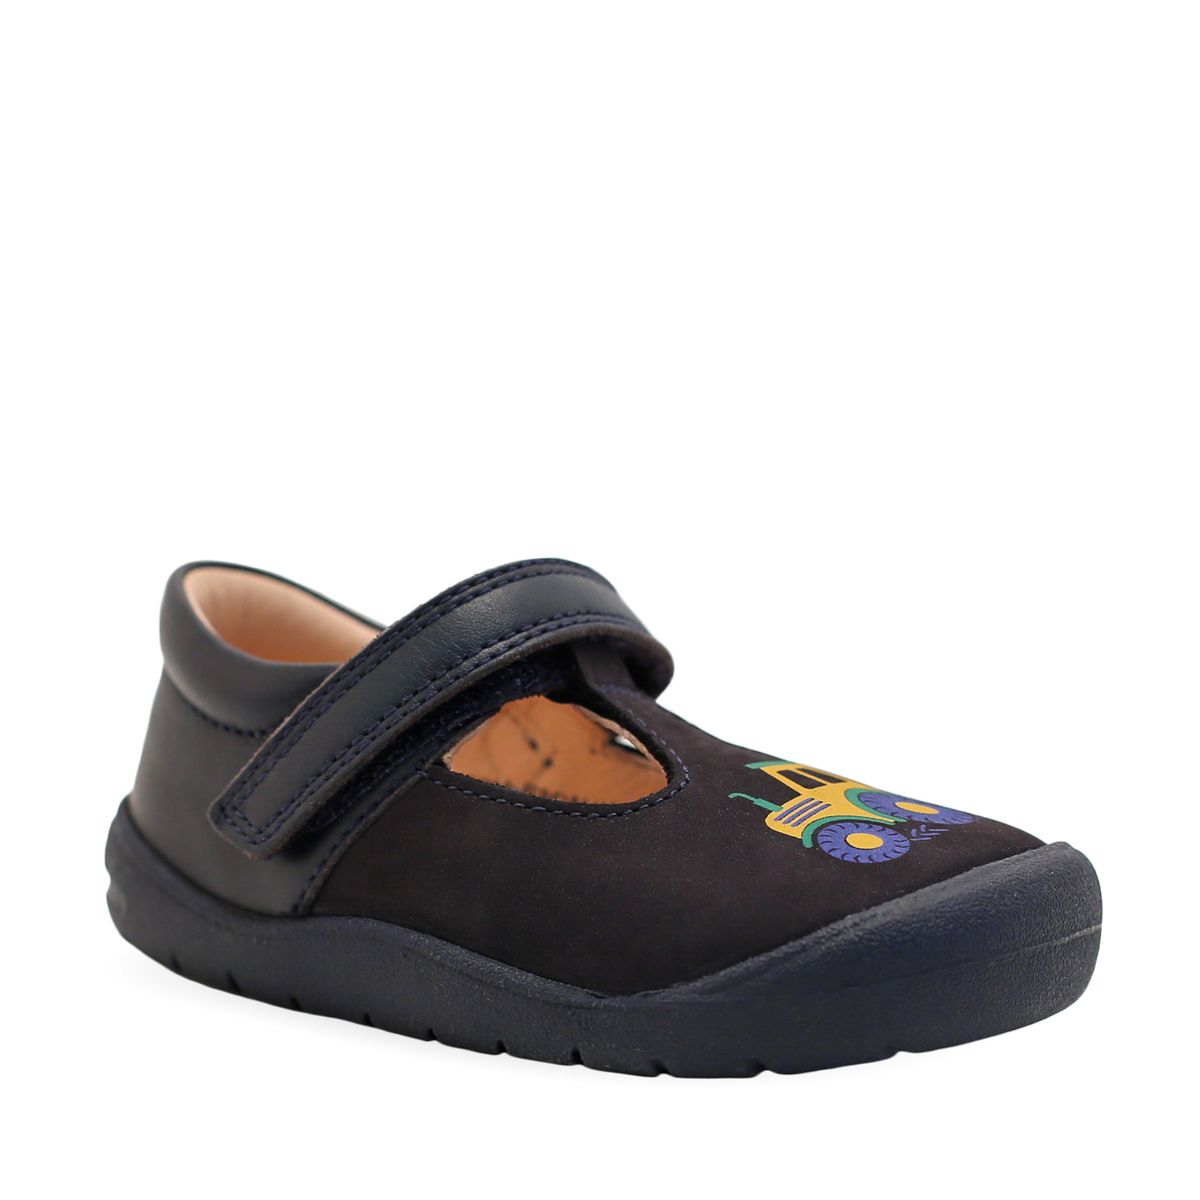 'Buddy' in Navy Nubuck and Leather Tractor detail from the exclusive Start-Rite Shoes and JoJo Maman Bébé Collection 